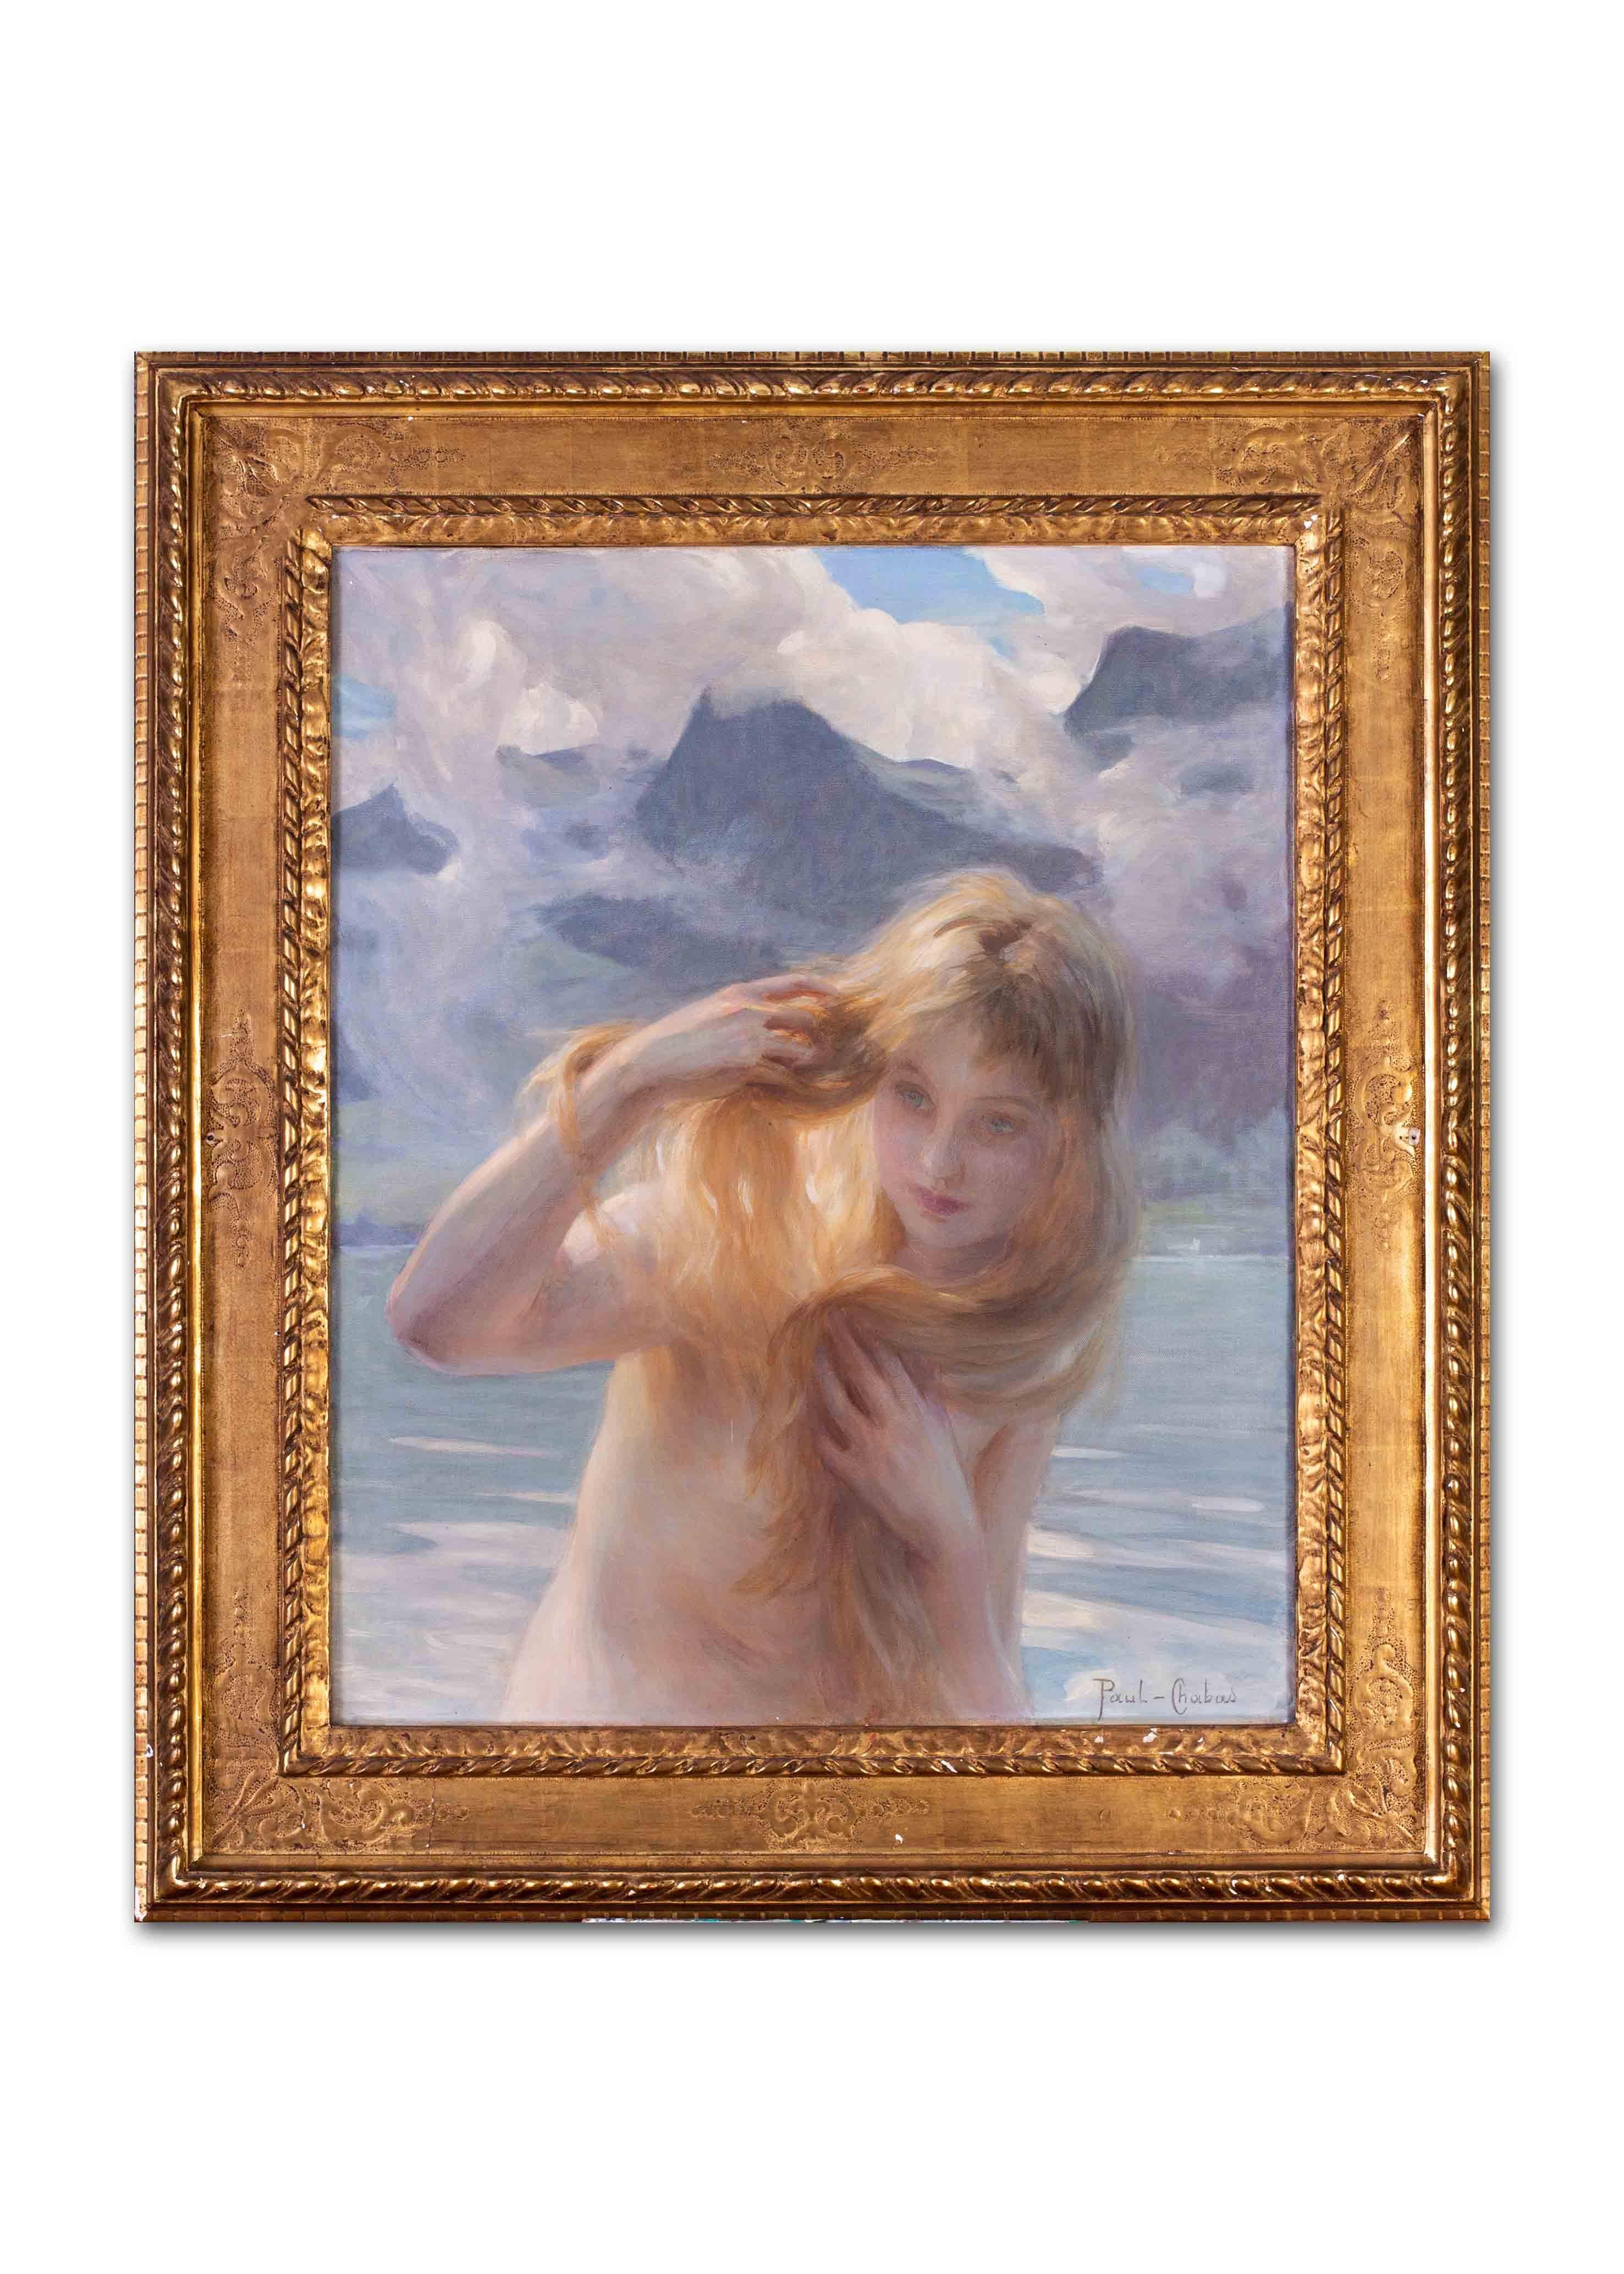 'Angel of the morning', beautiful summer scene by Paul Emile Chabas, French 4